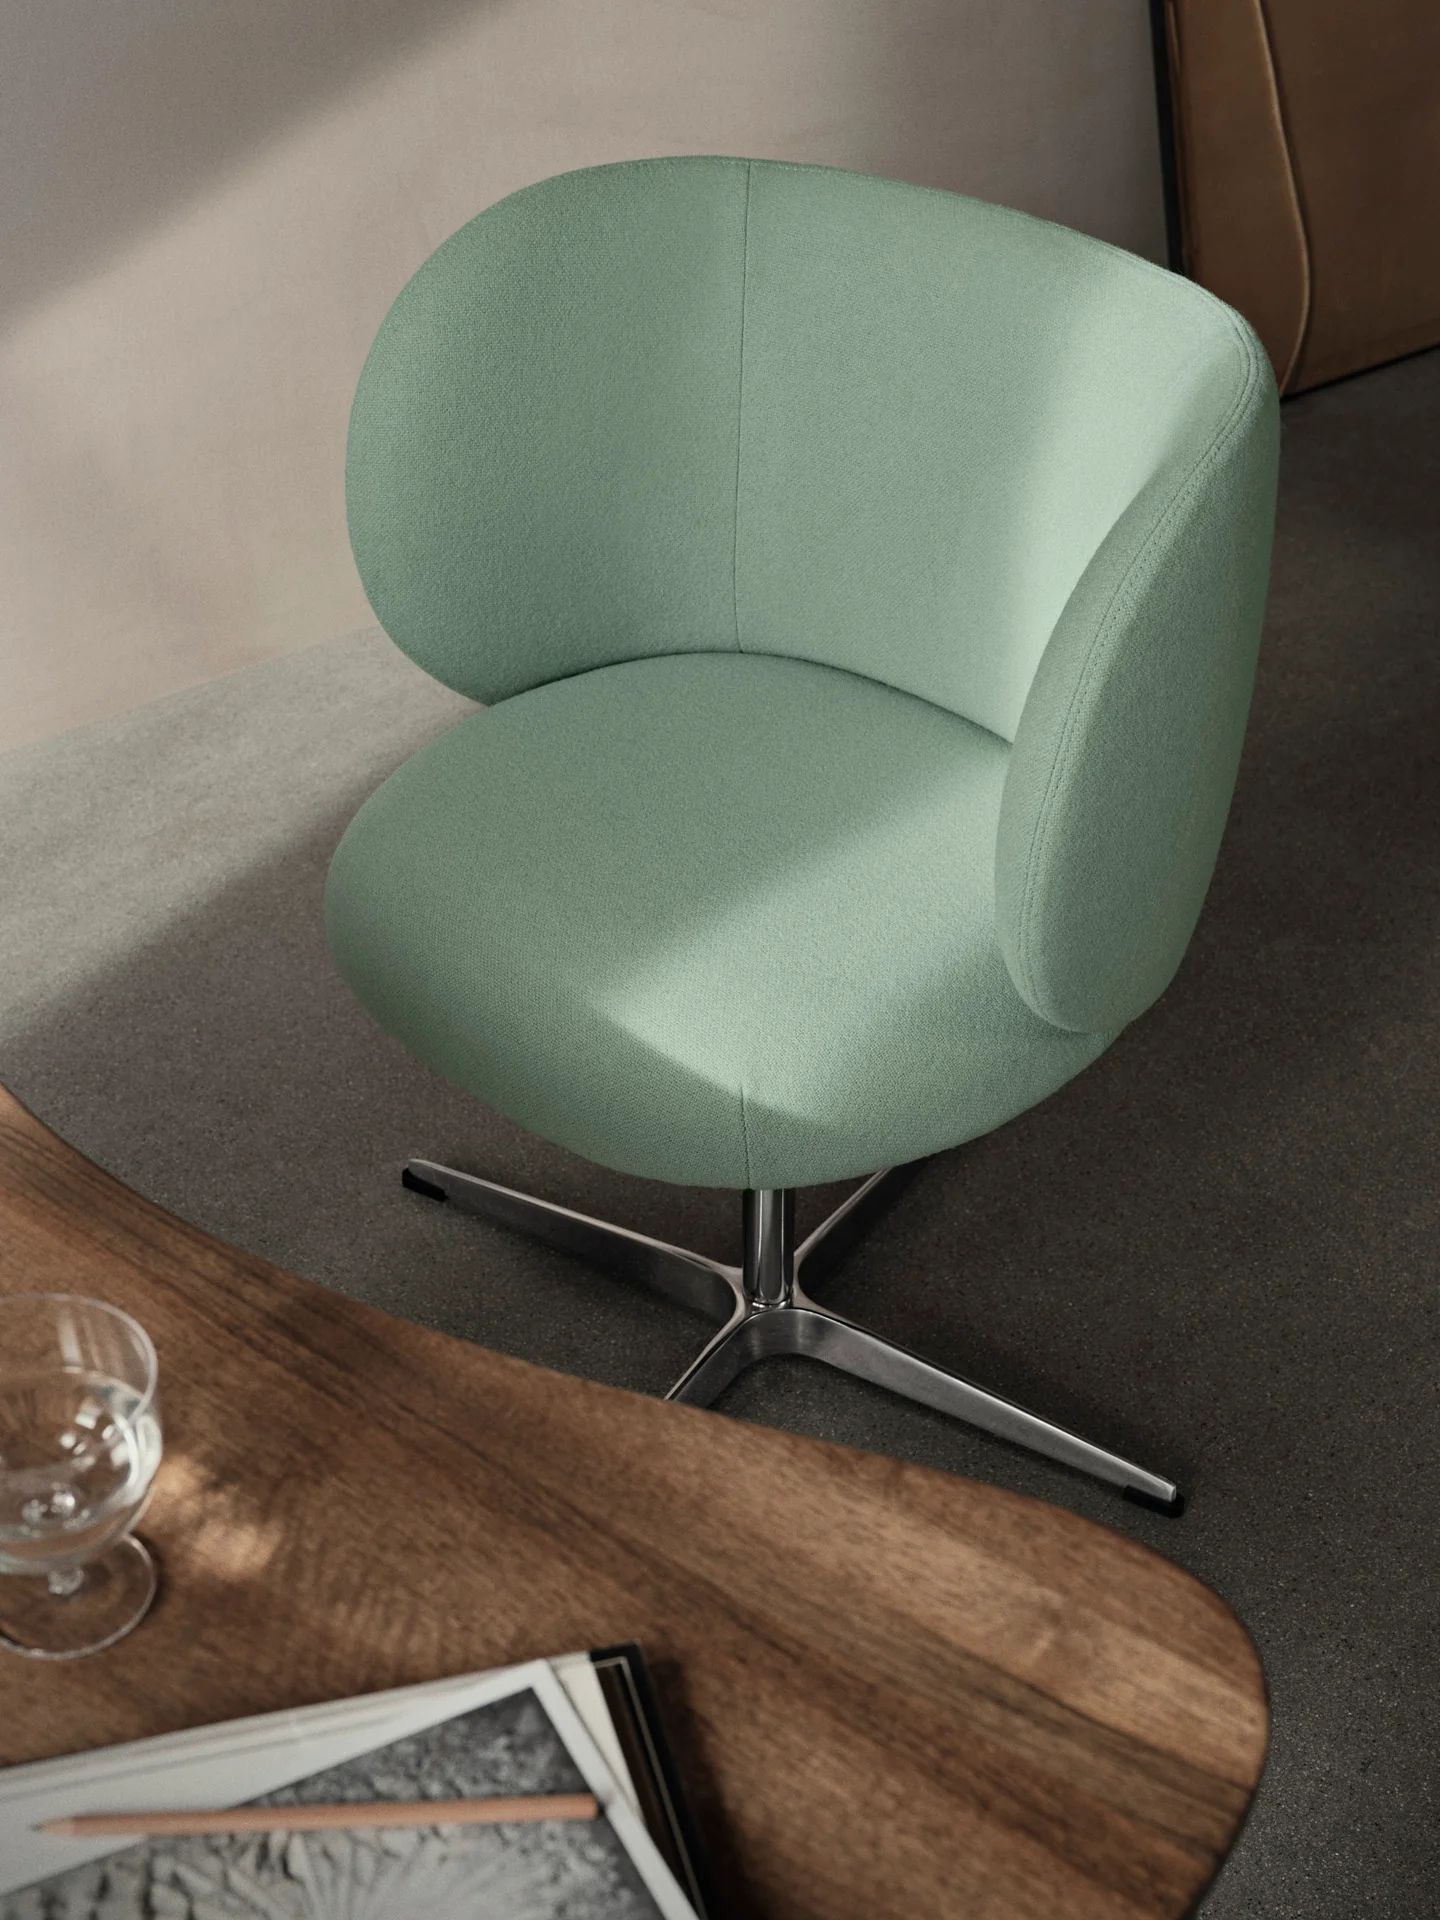 The Rico table armchair in Mint color